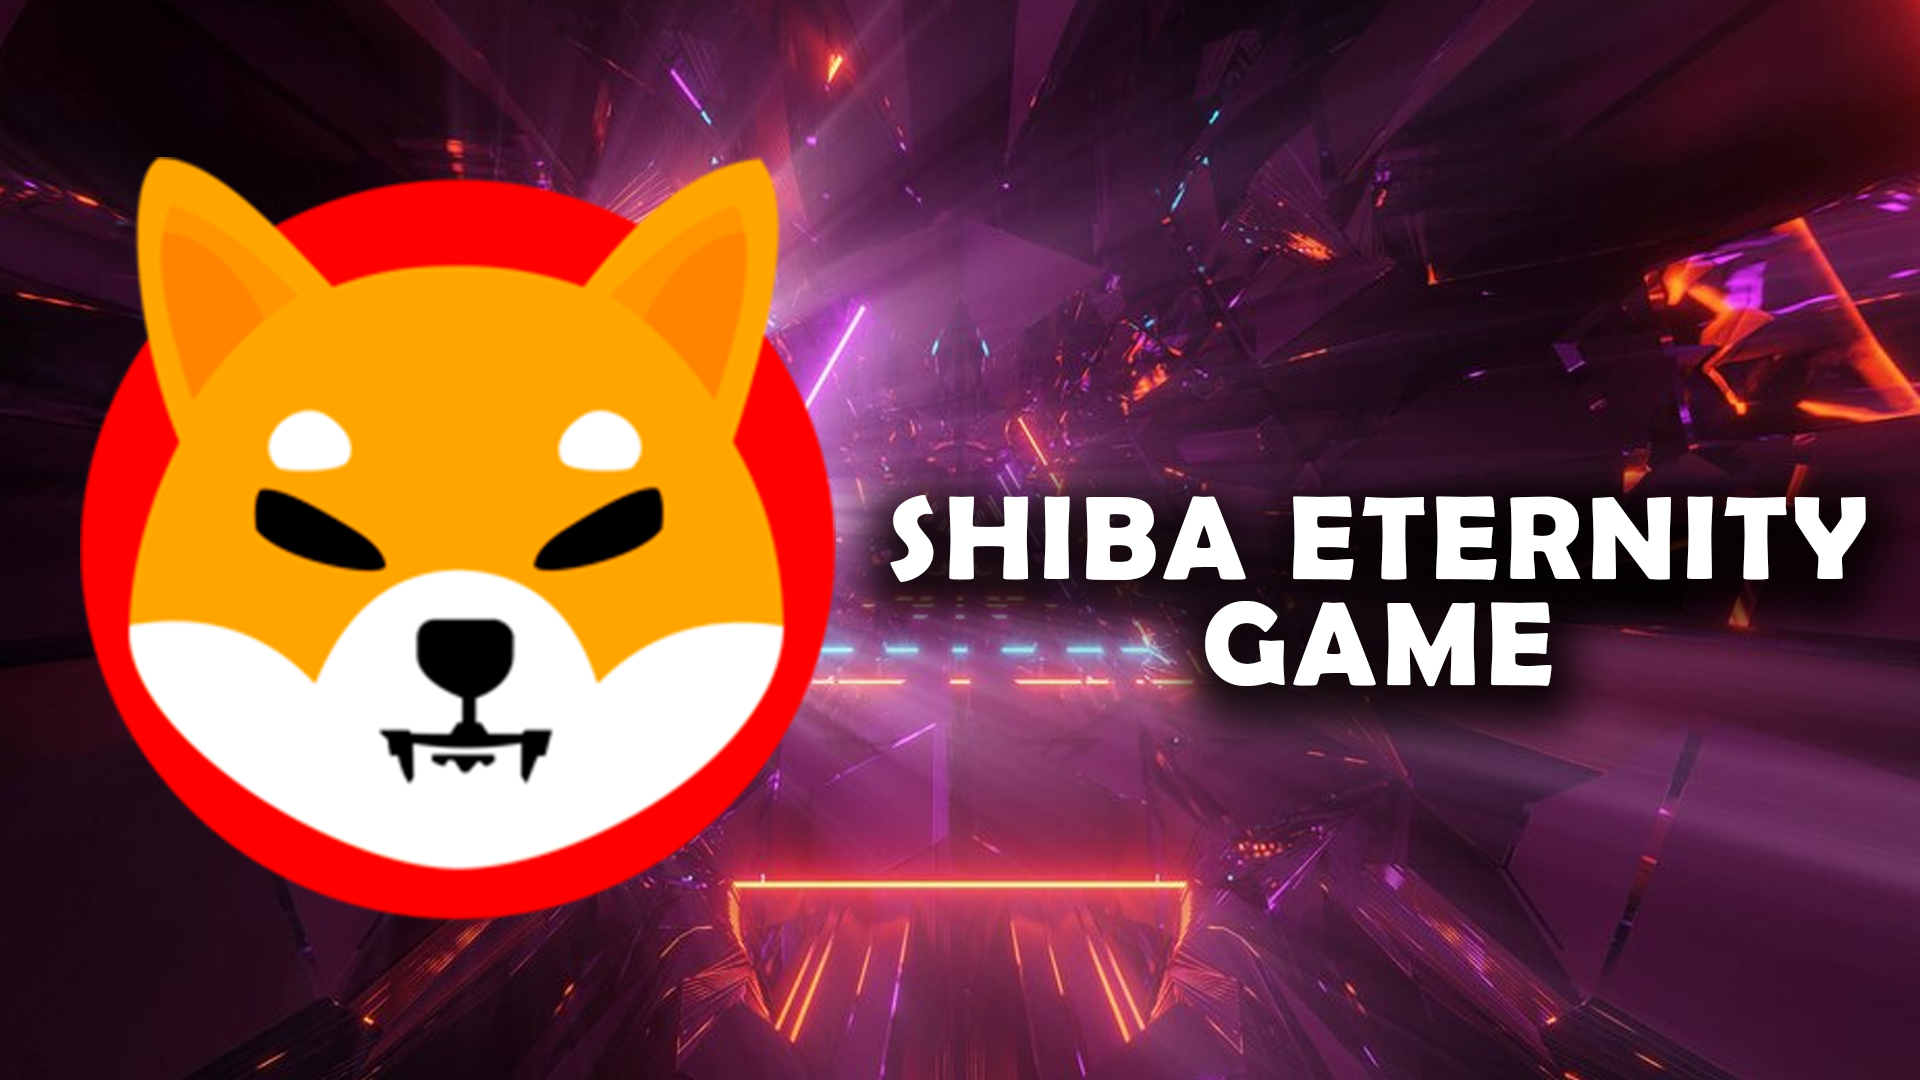 Shiba Eternity Game: A Battle Of Brains With A Deck Of Cards